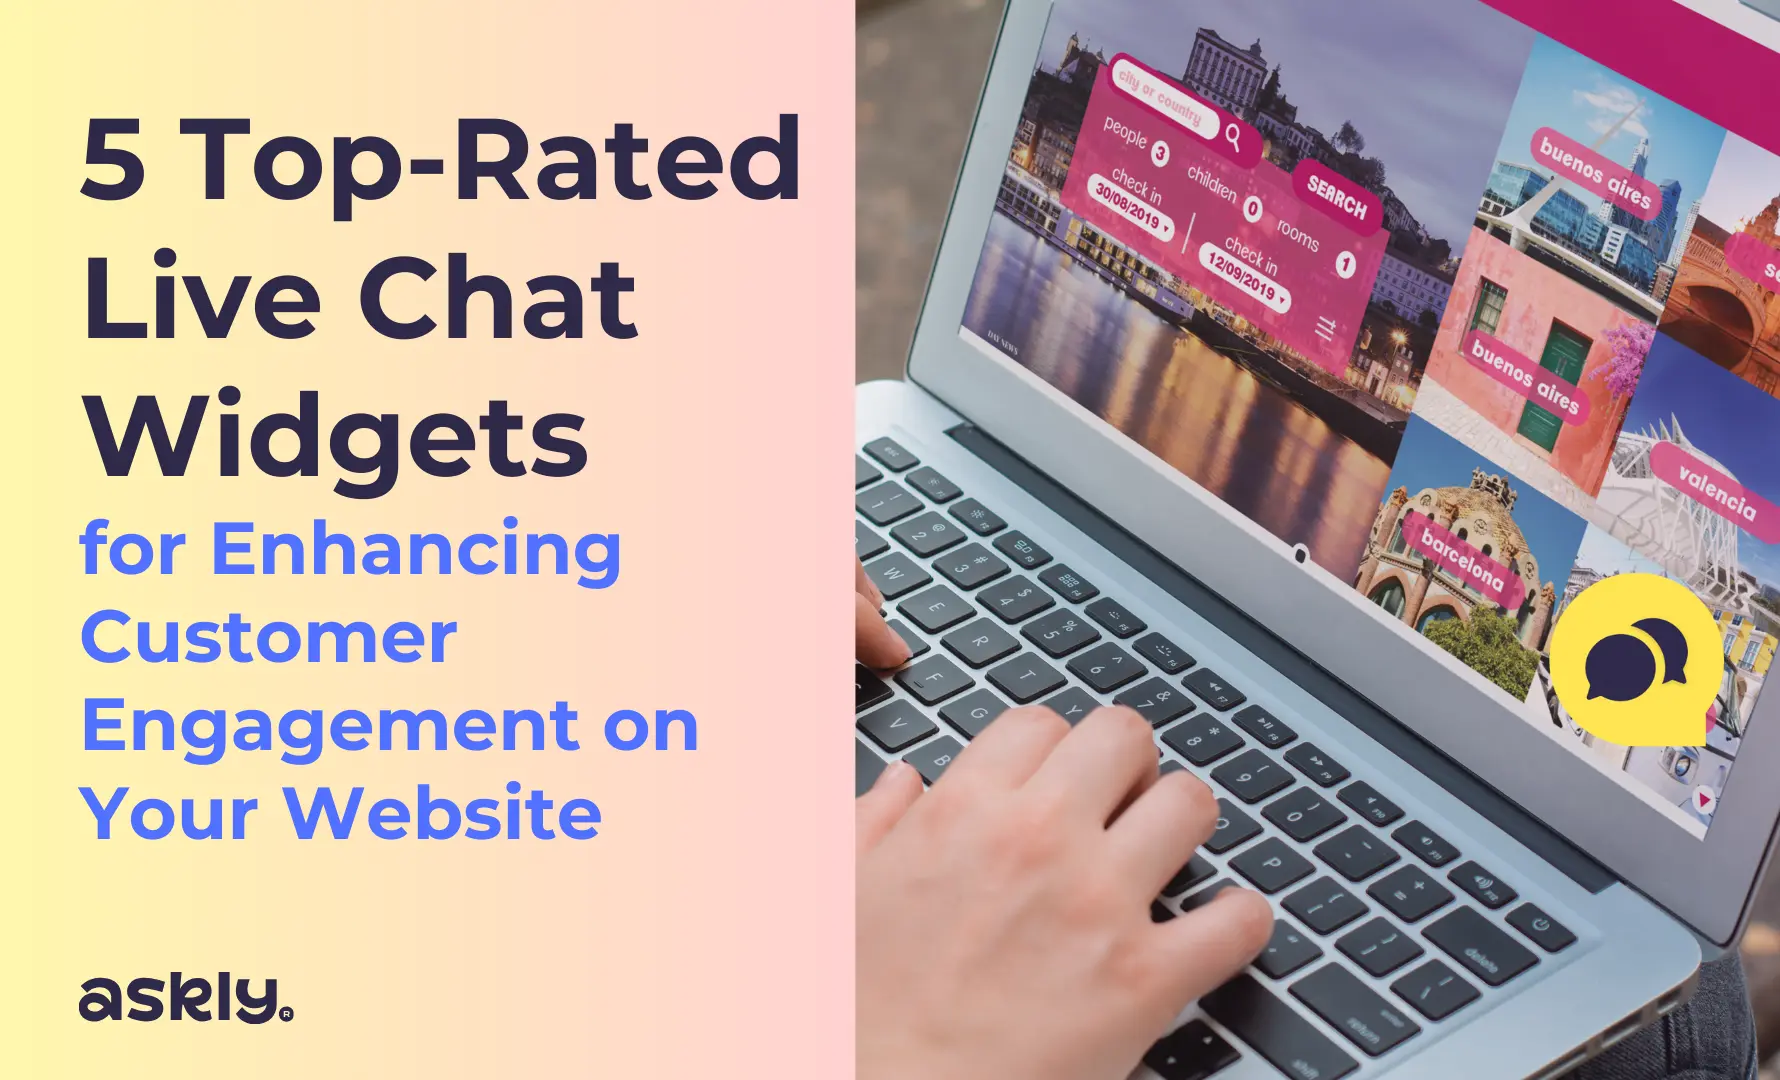 5 Top-Rated Live Chat Widgets for Enhancing Customer Engagement on Your Website